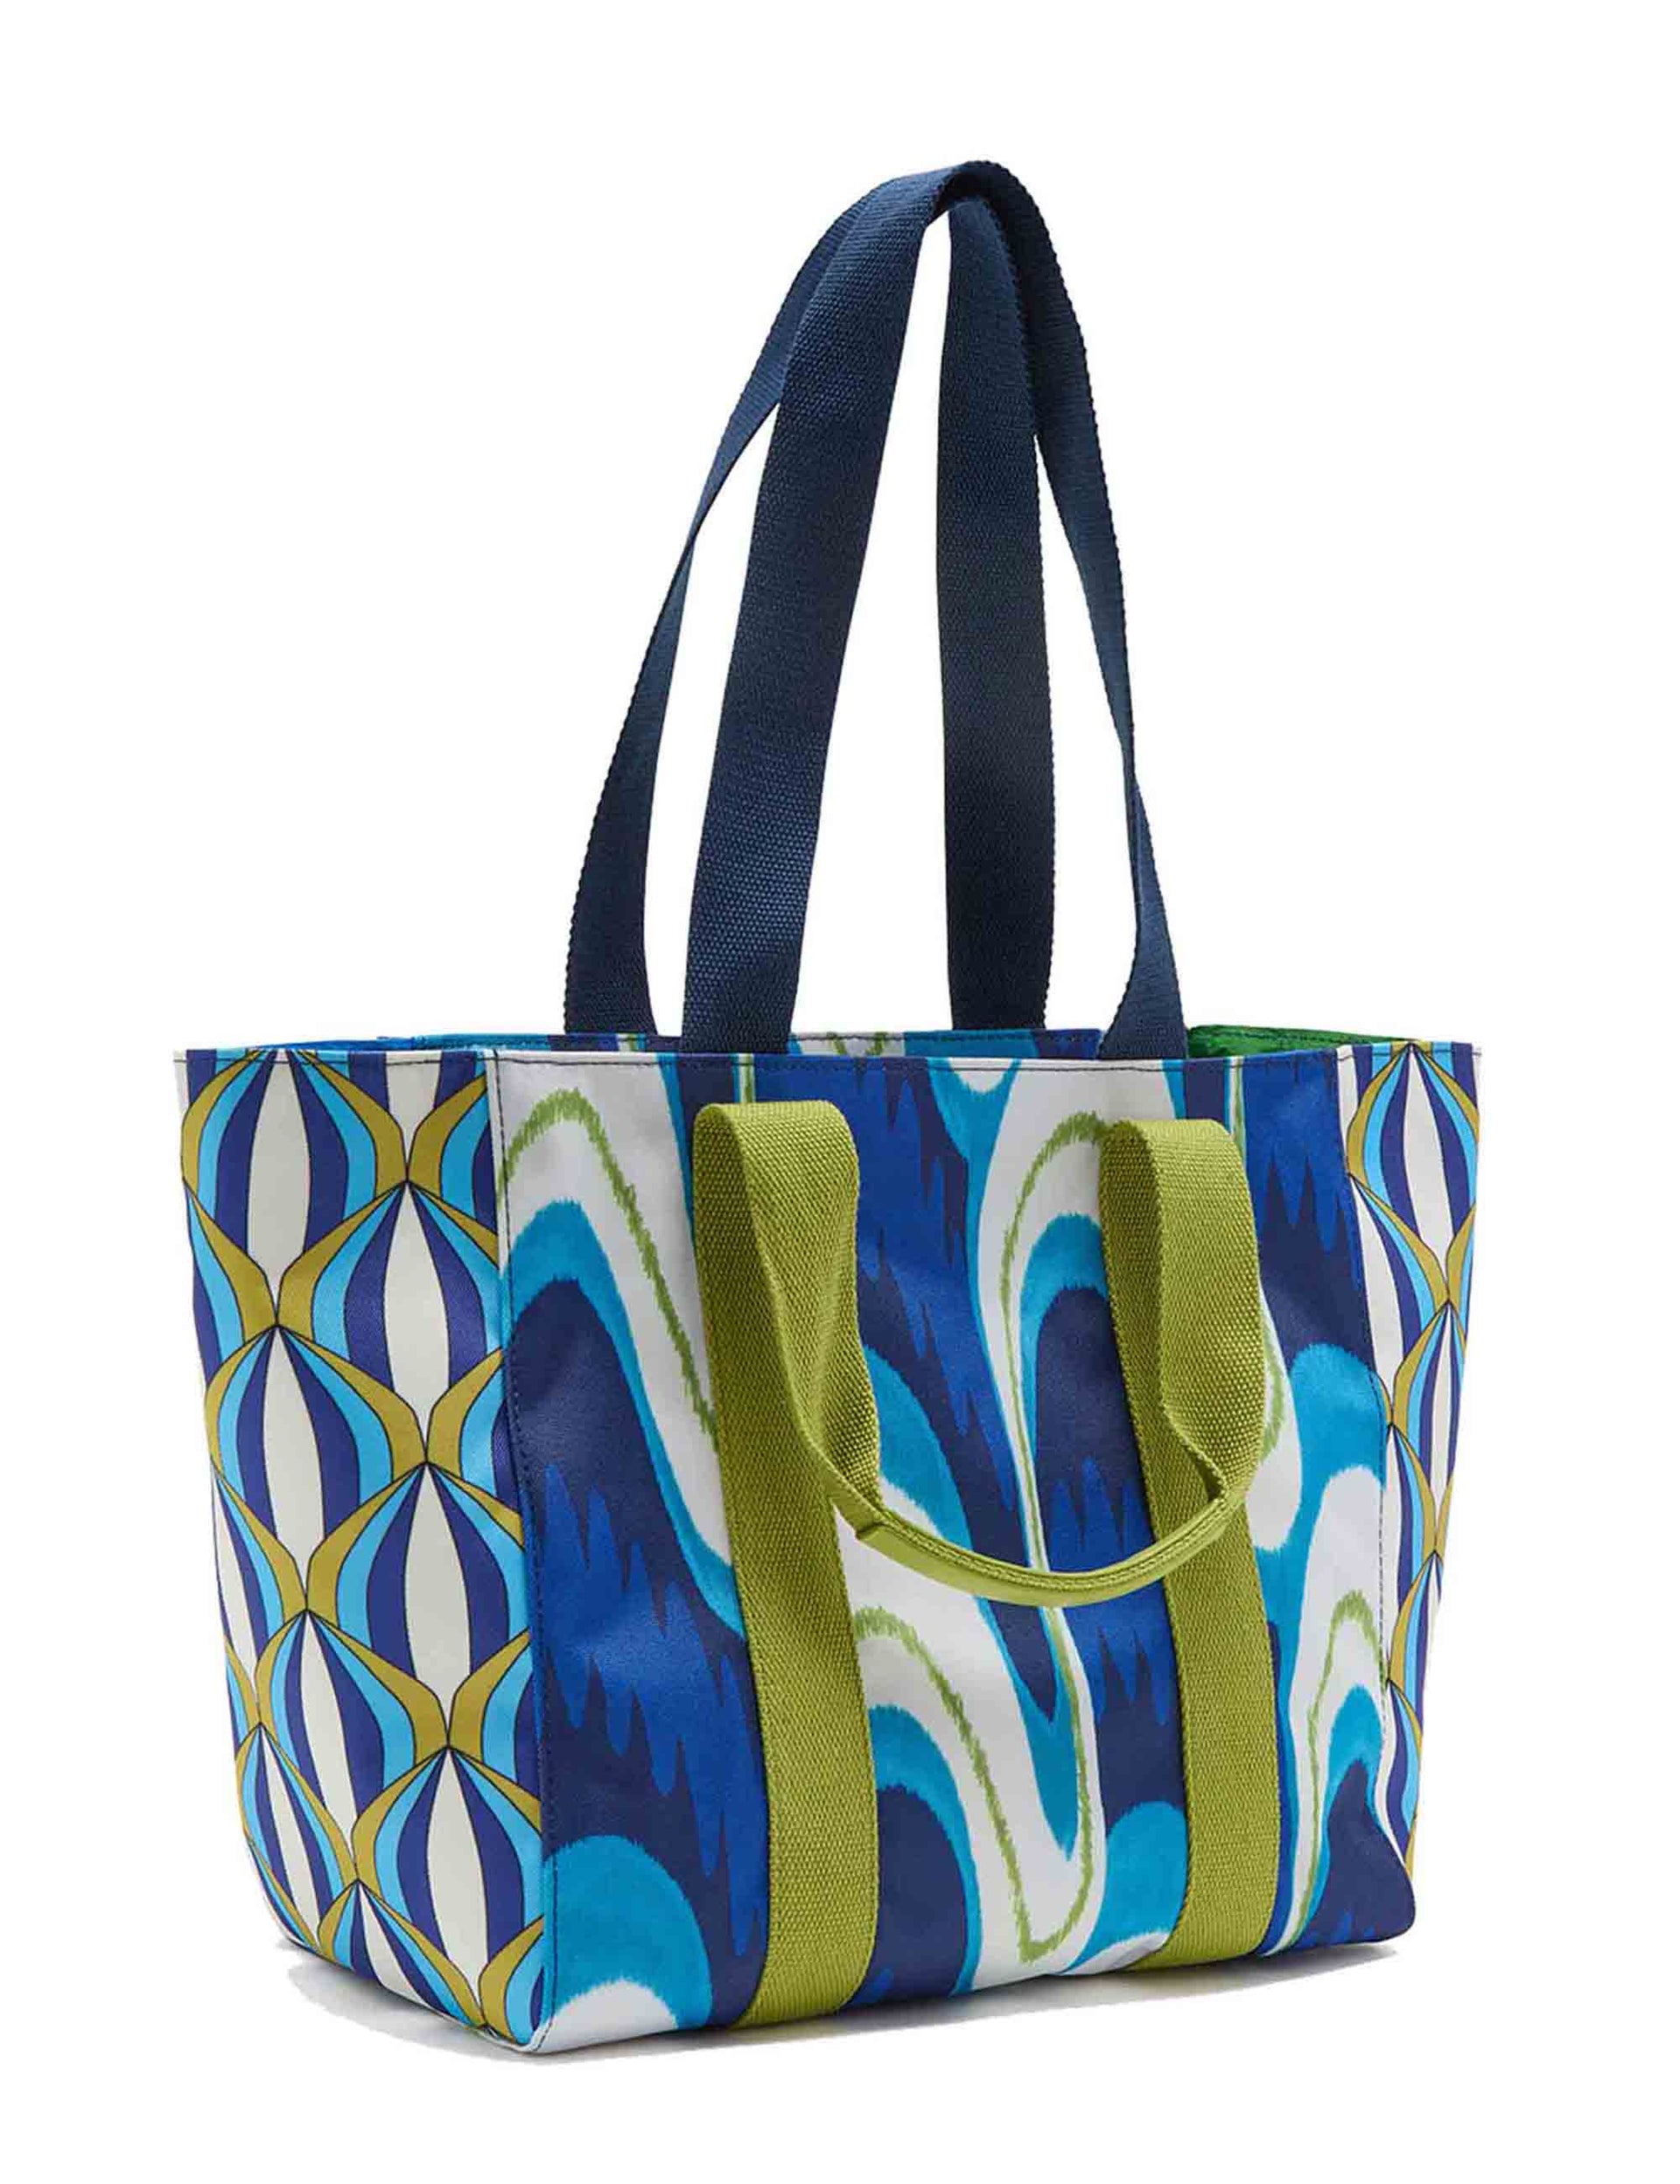 Fortuna Prints women's shopping bags in blue patterned fabric